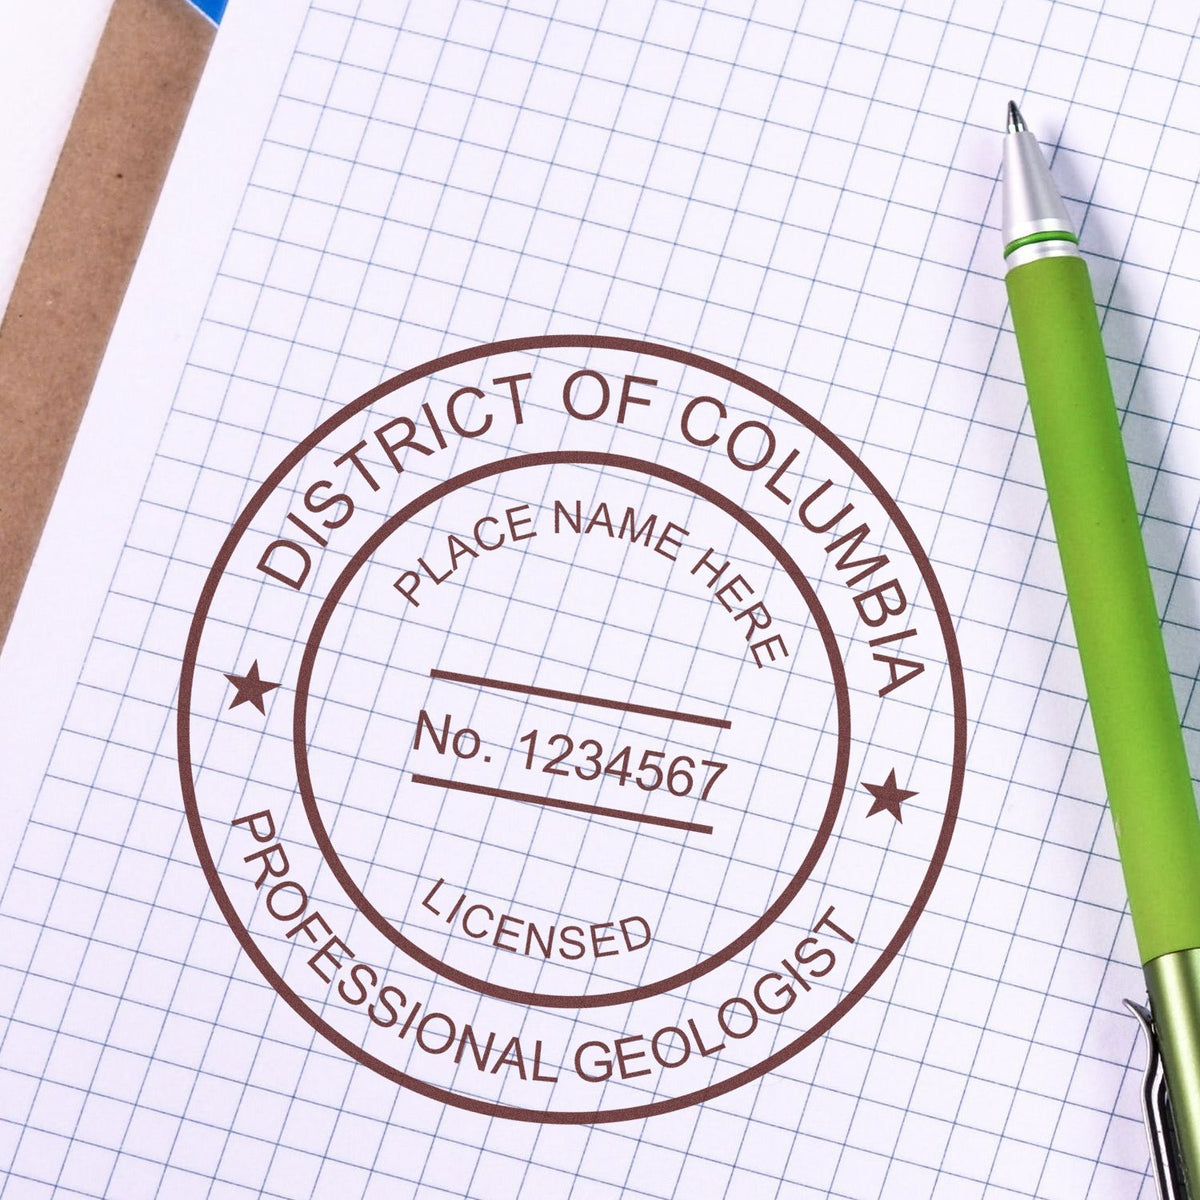 The Self-Inking District of Columbia Geologist Stamp stamp impression comes to life with a crisp, detailed image stamped on paper - showcasing true professional quality.